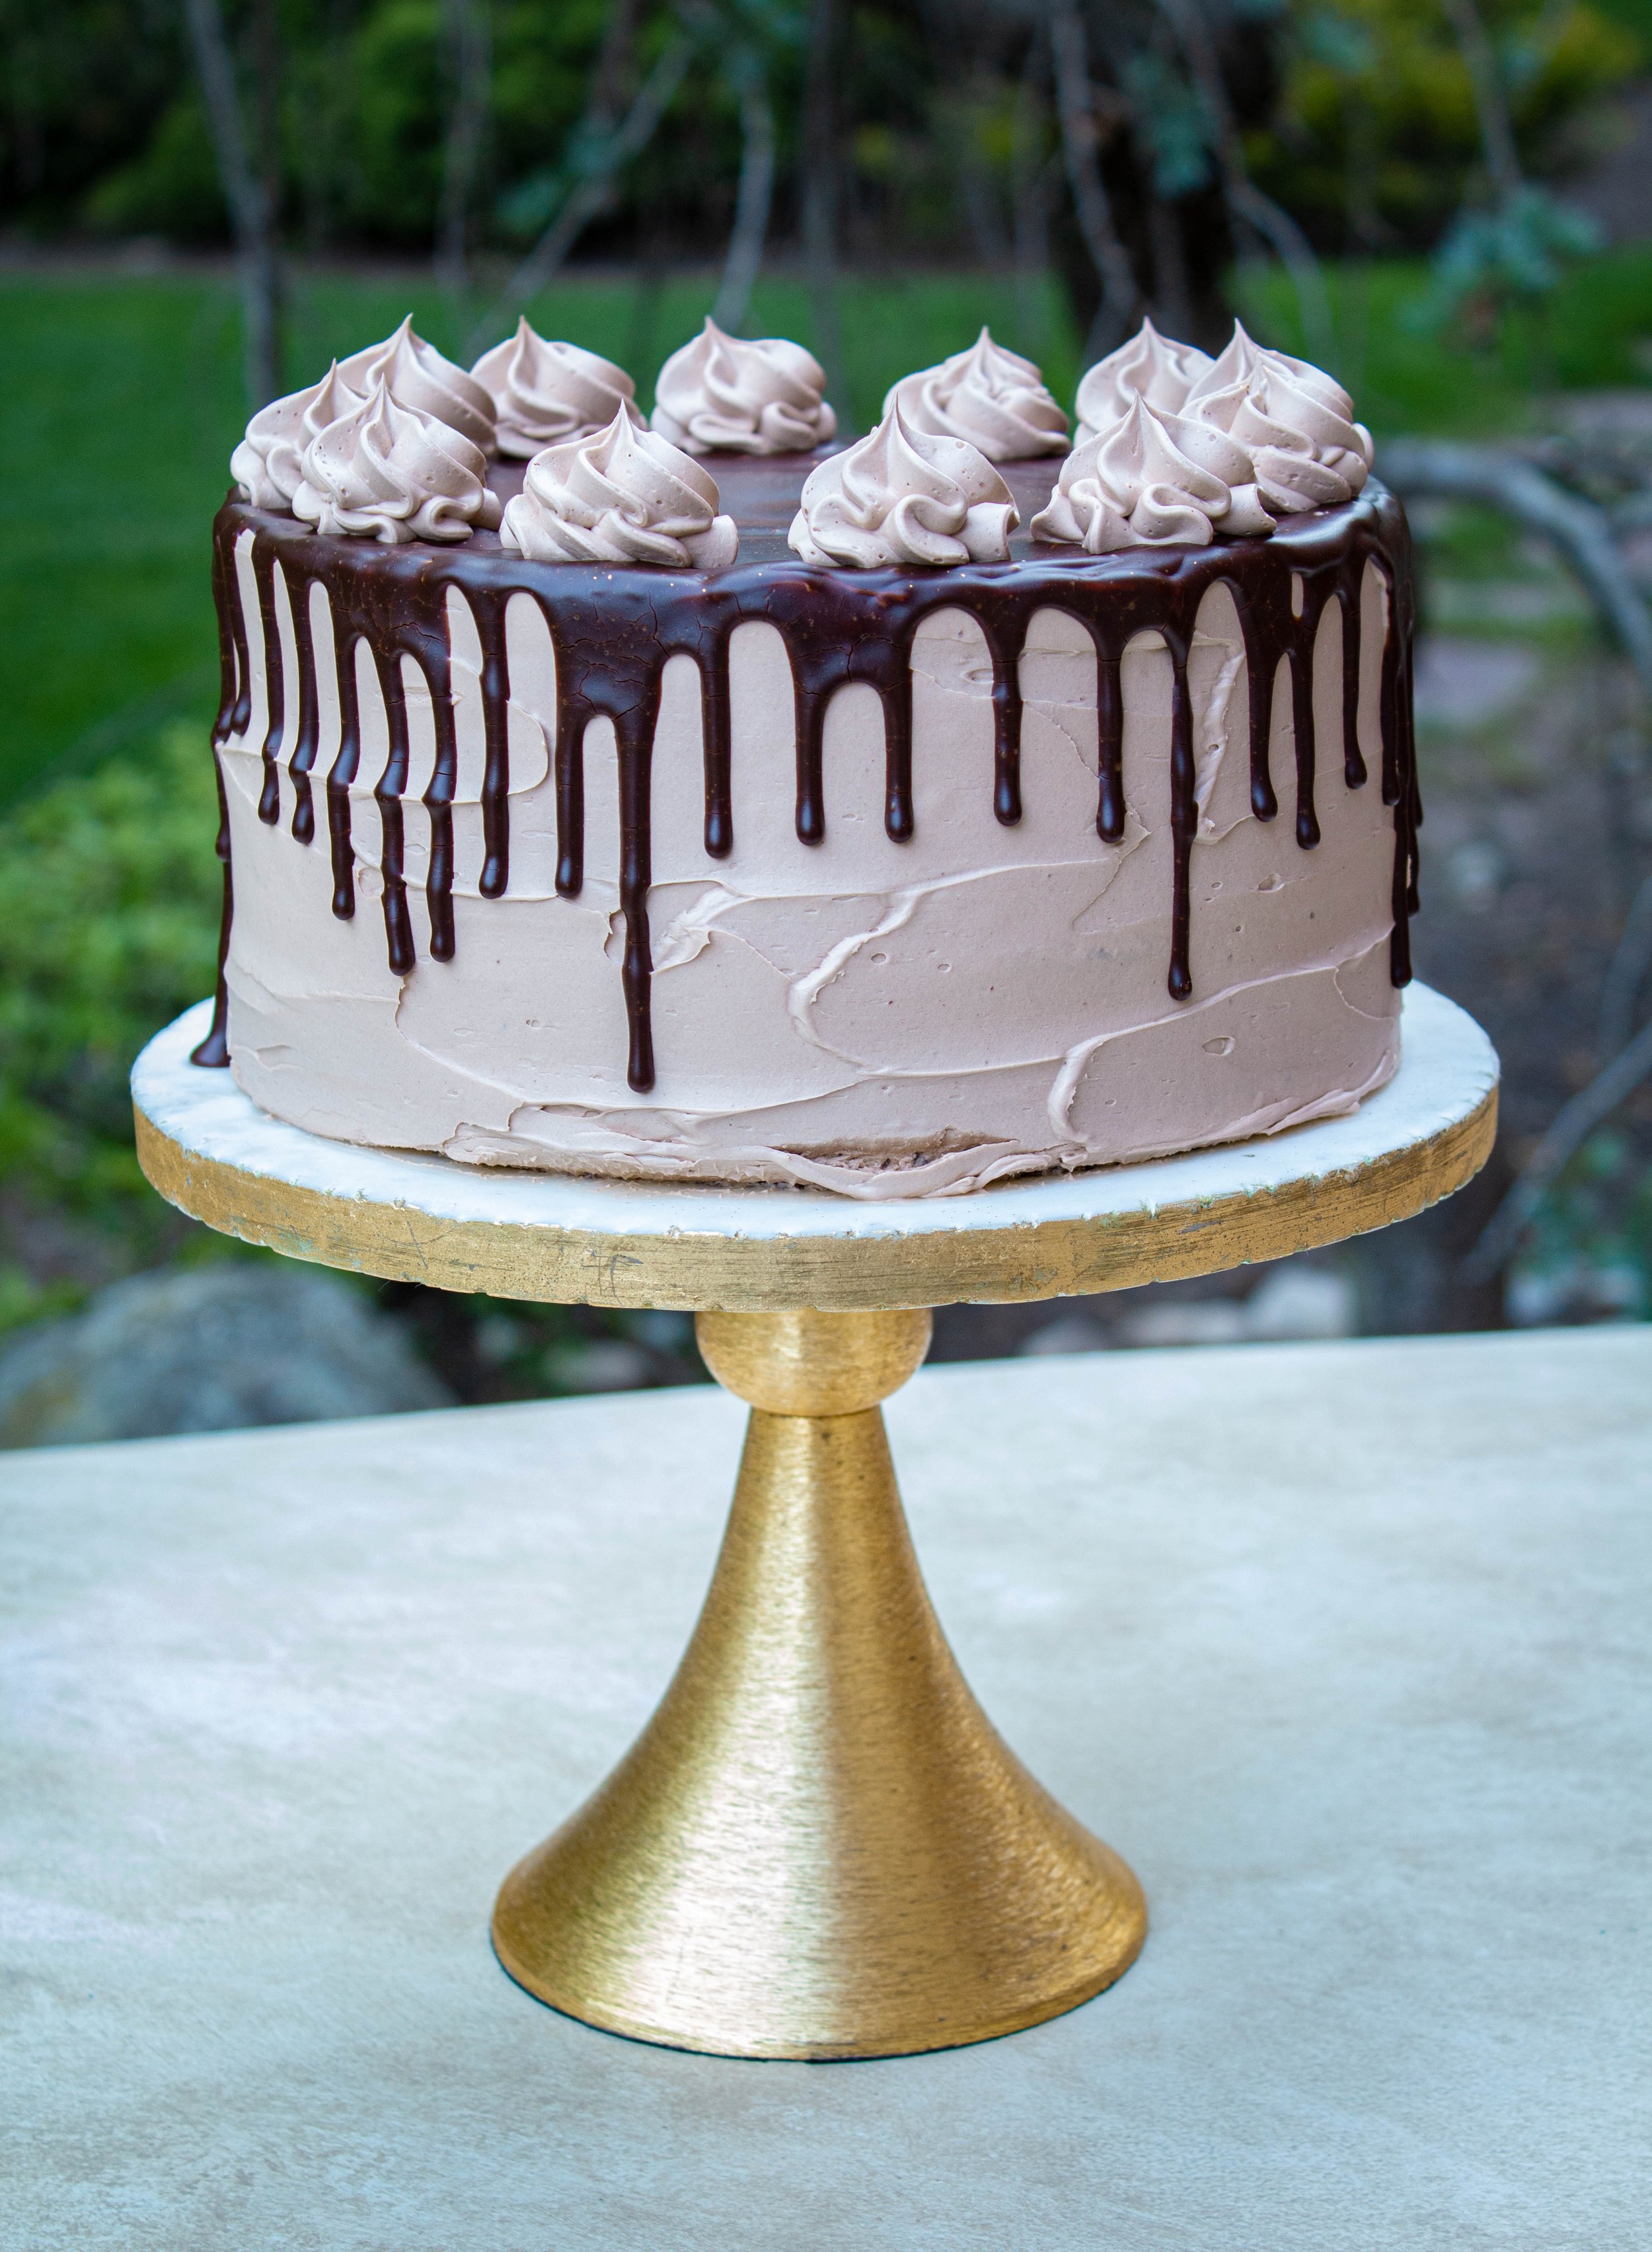 Chocolate Cake with Chocolate Glaze Drizzle on a gold and white marble cake stand in an outdoor setting.